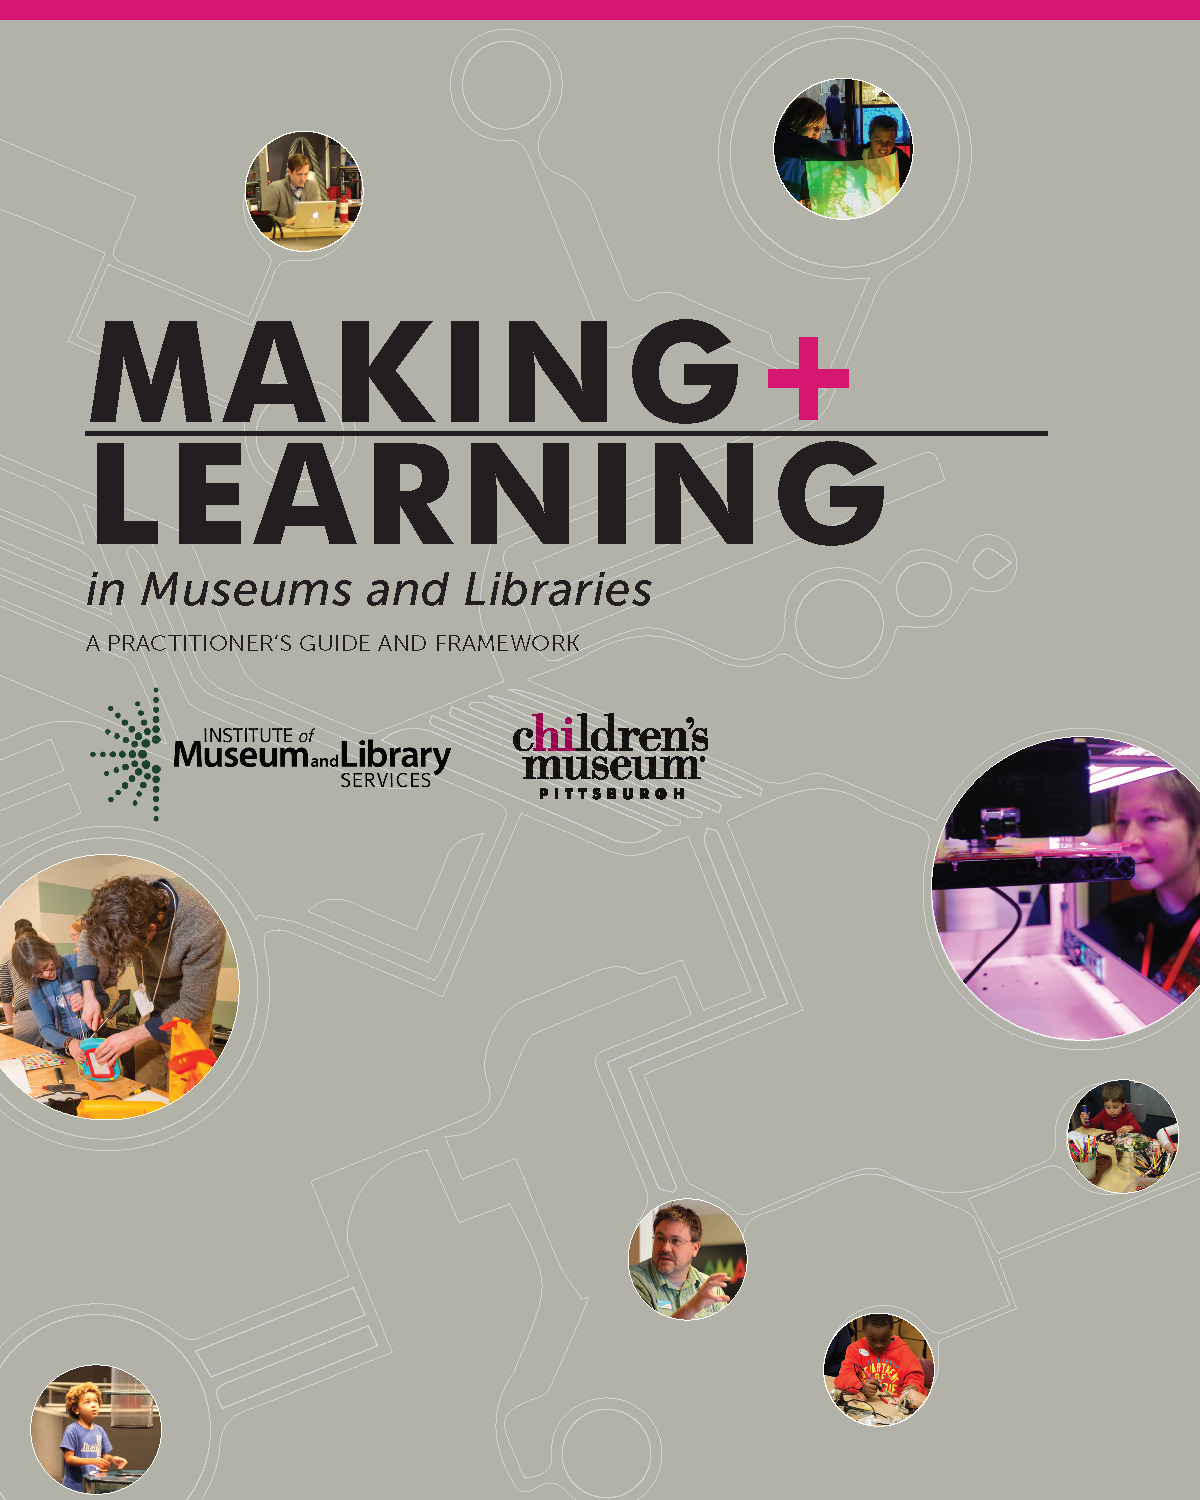 Making + Learning